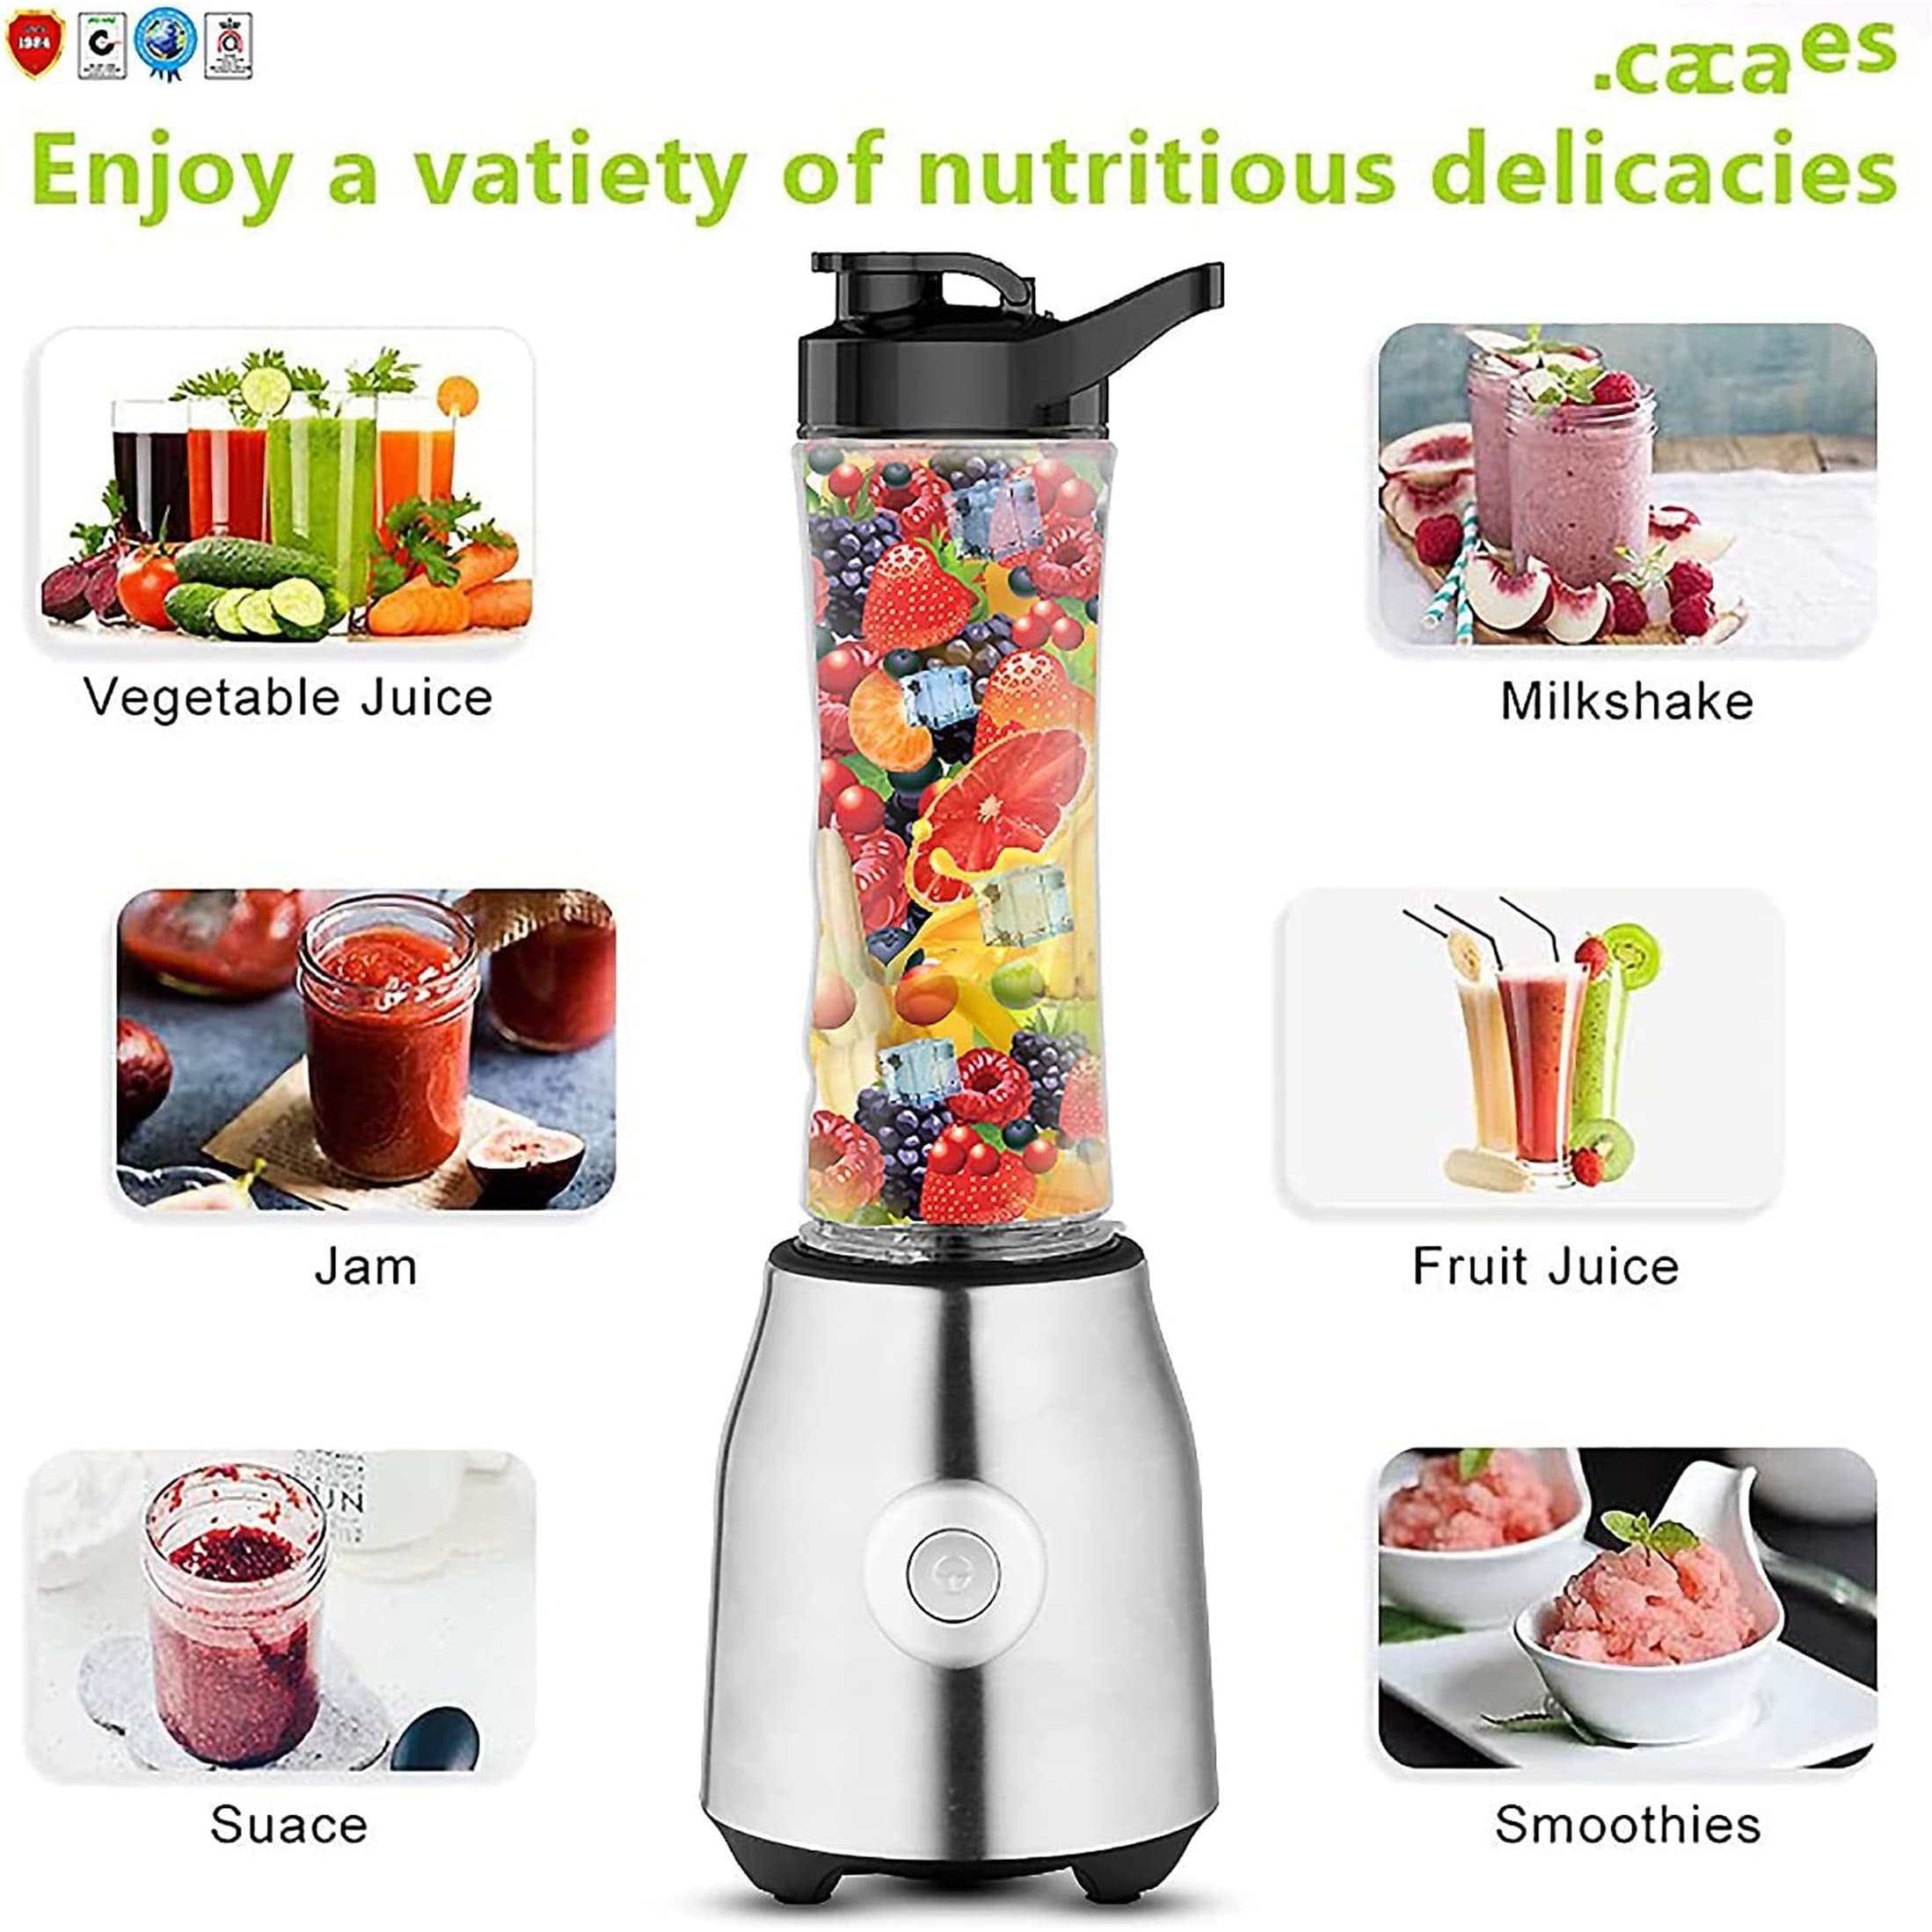 https://ak1.ostkcdn.com/images/products/is/images/direct/6648d54c457df785d57eee2ac4e383820095c9cc/Blender-Electric-Blenders-Smoothie-Shake-Mixer-Food-Blend-Grind-%281Cup%29.jpg